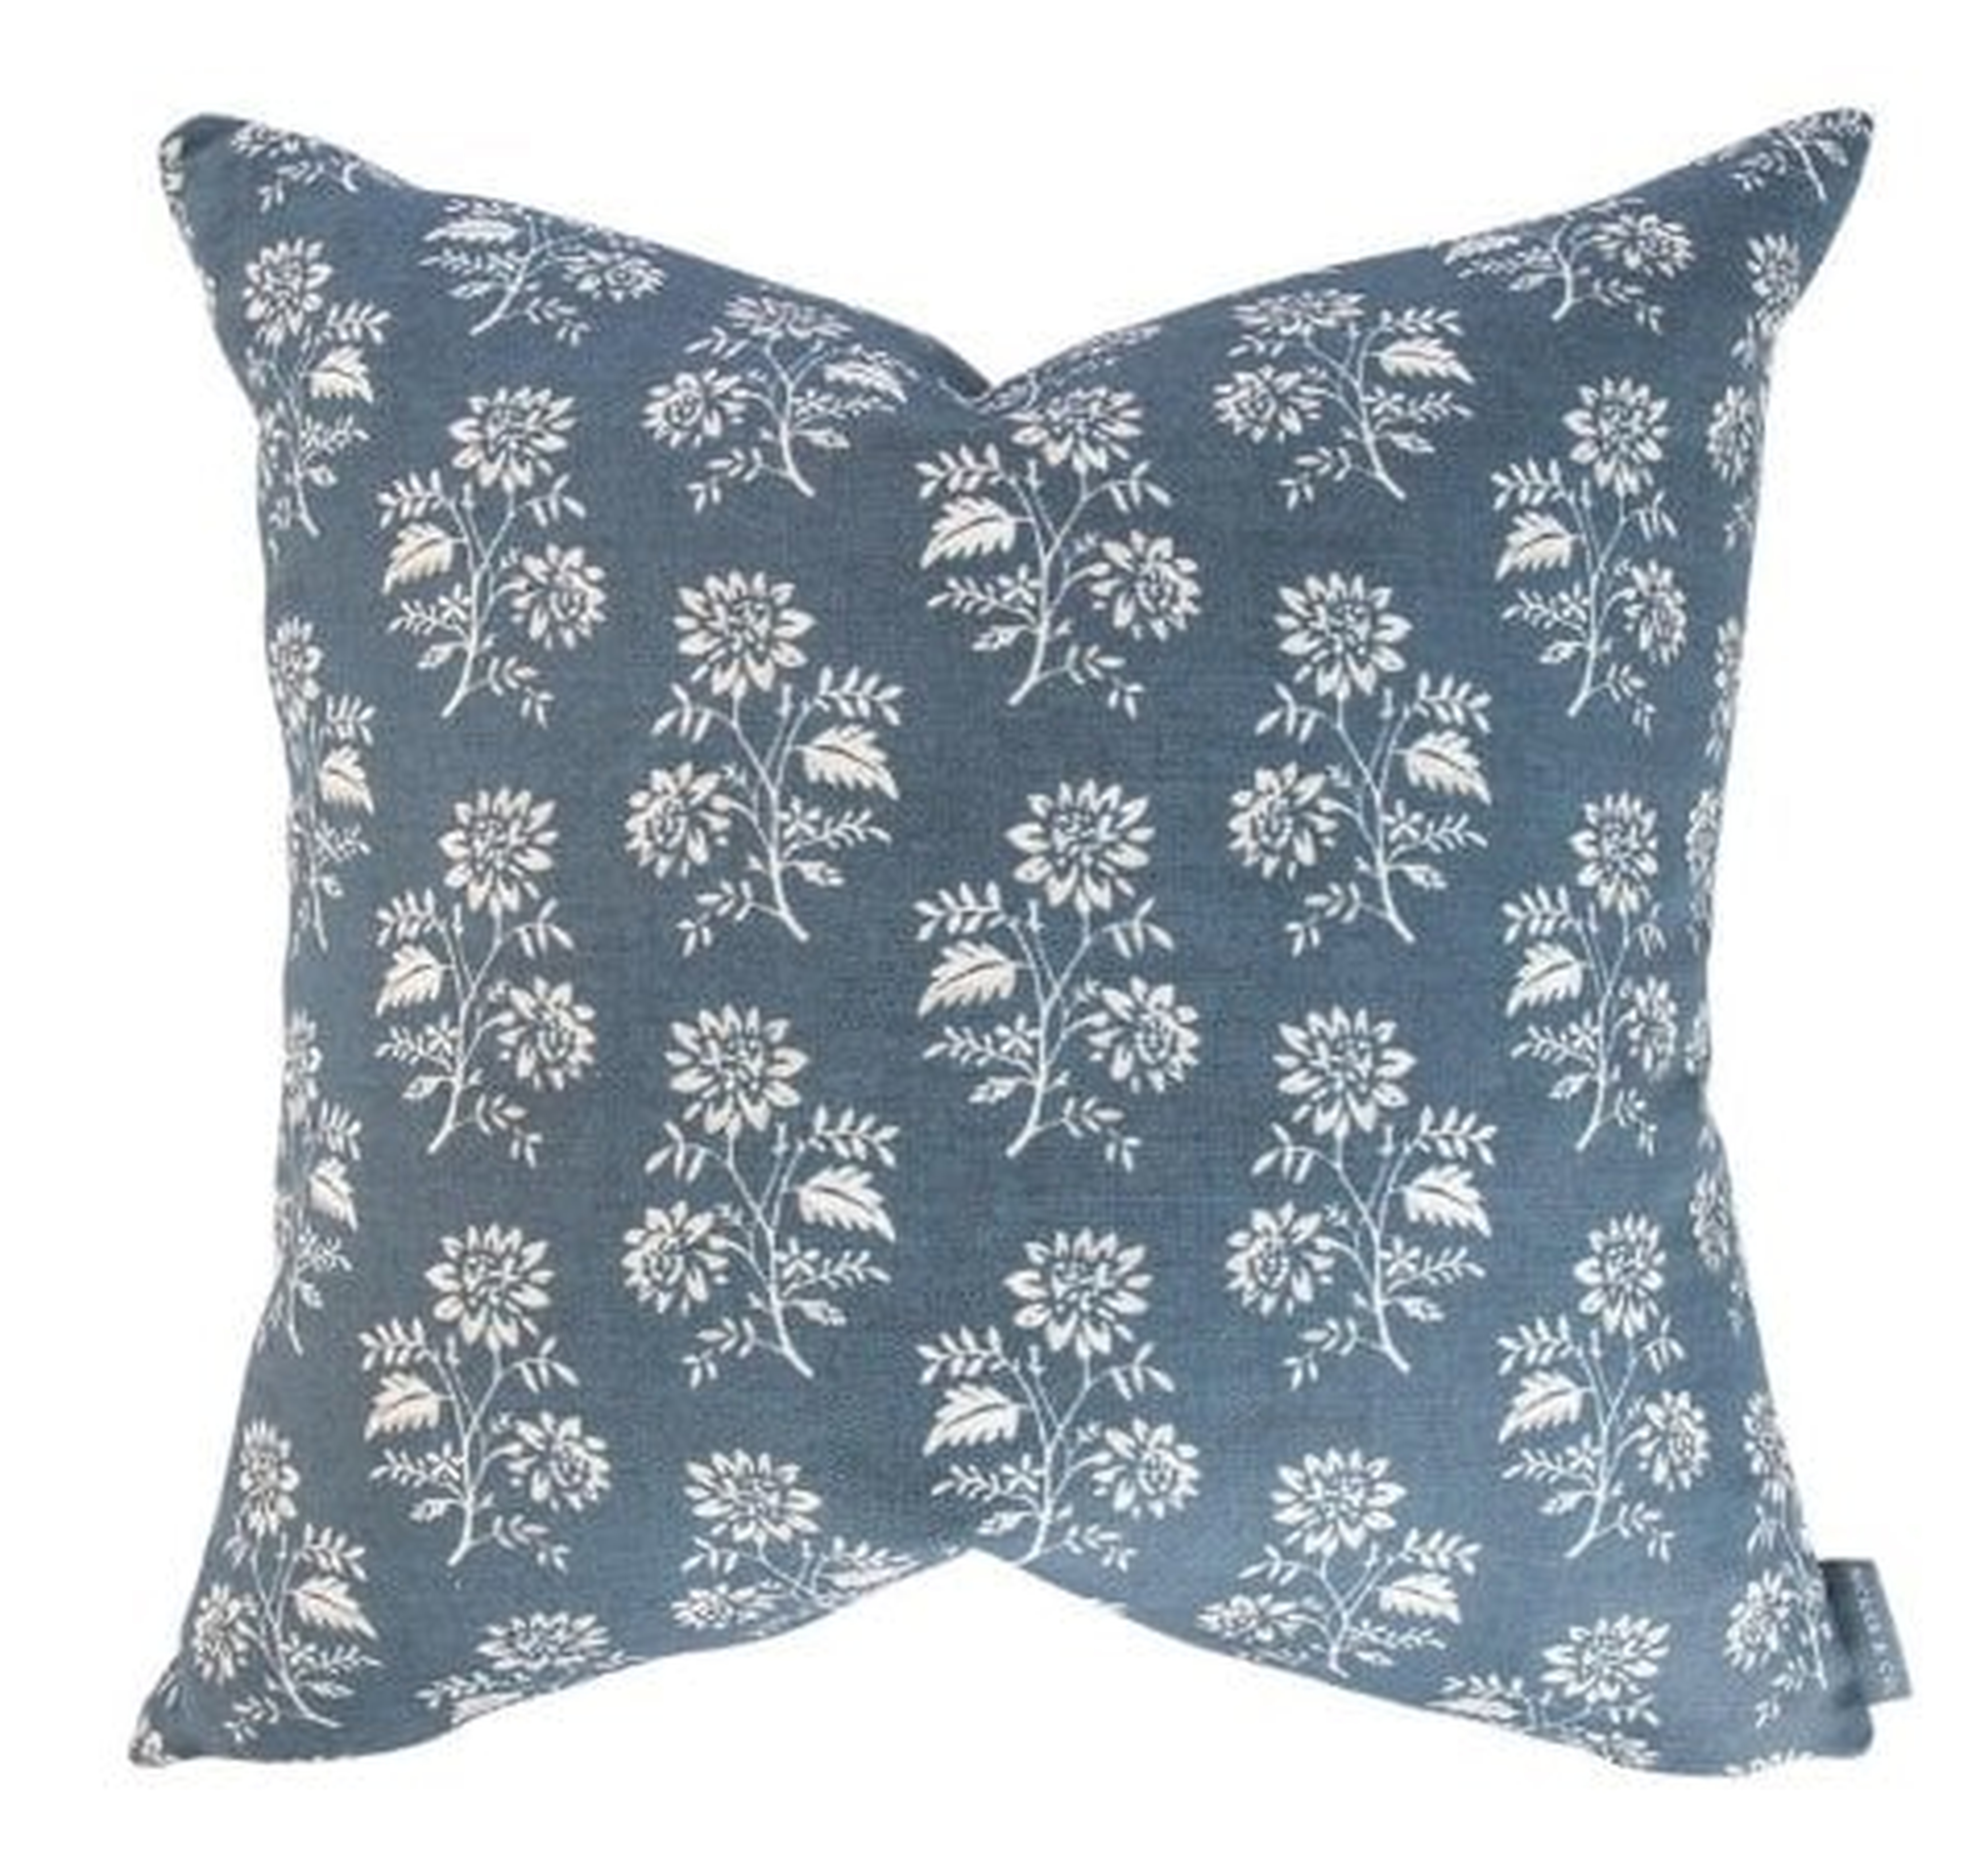 CAMILLE NAVY FLORAL PILLOW COVER - McGee & Co.